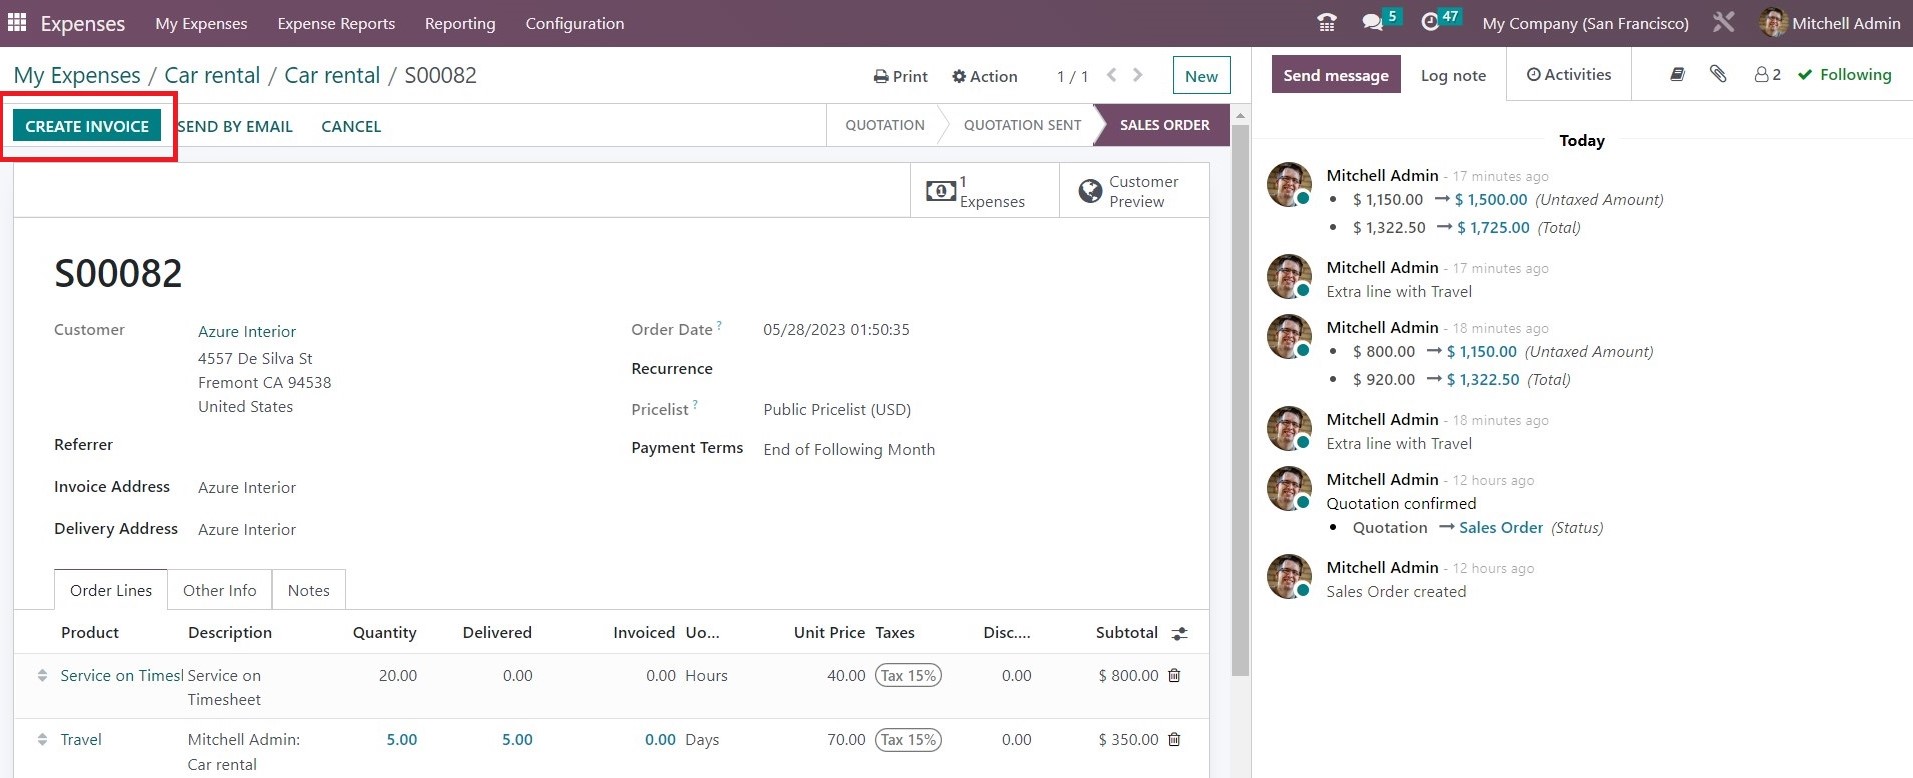 Reinvoicing Expenses To Customers in Odoo - 12 - Midis